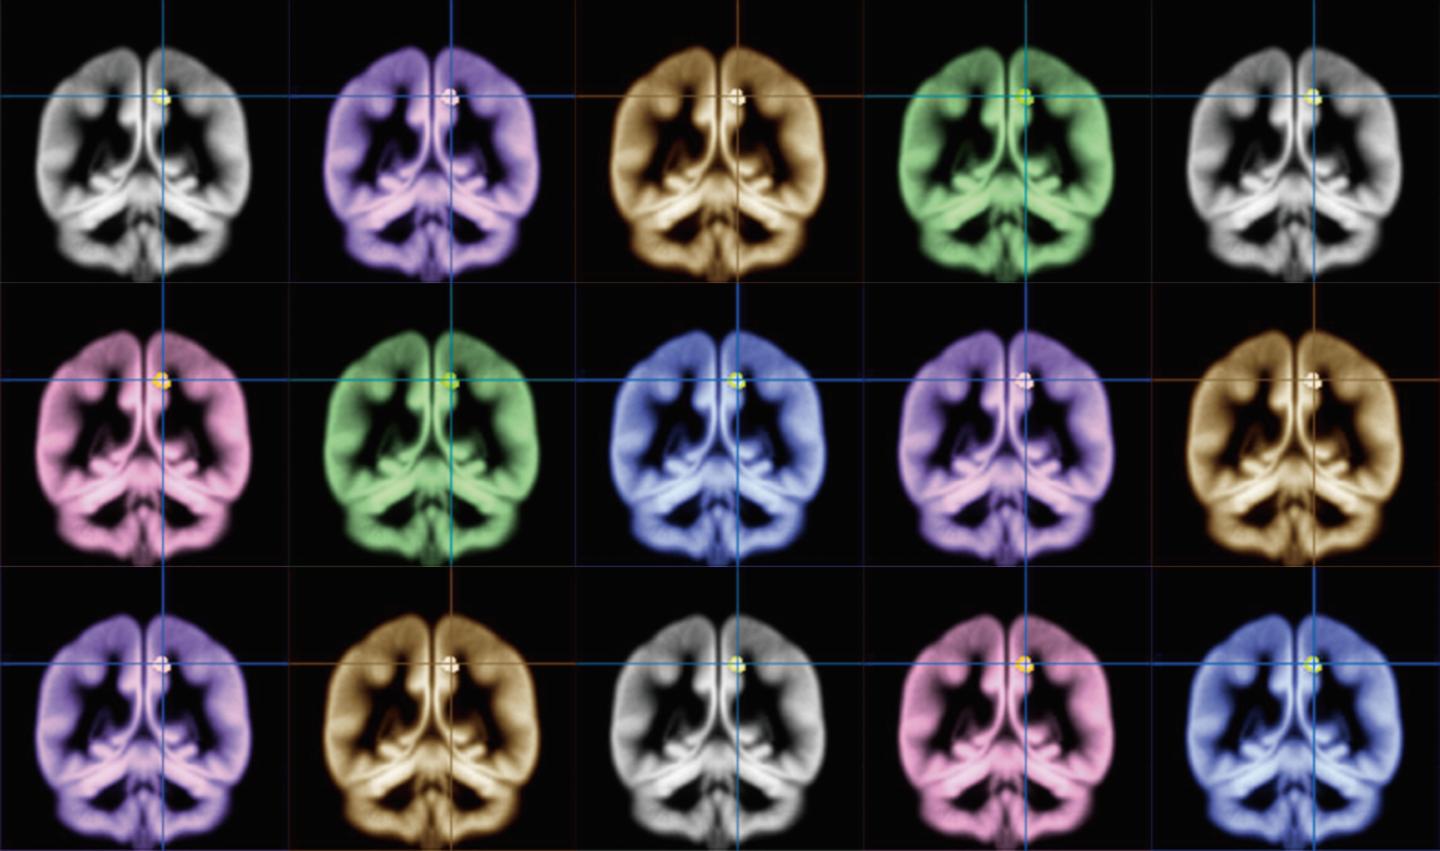 Study Finds Markers Of ADHD In MRI Scans: 'Changes In Almost All Regions Of Brain'